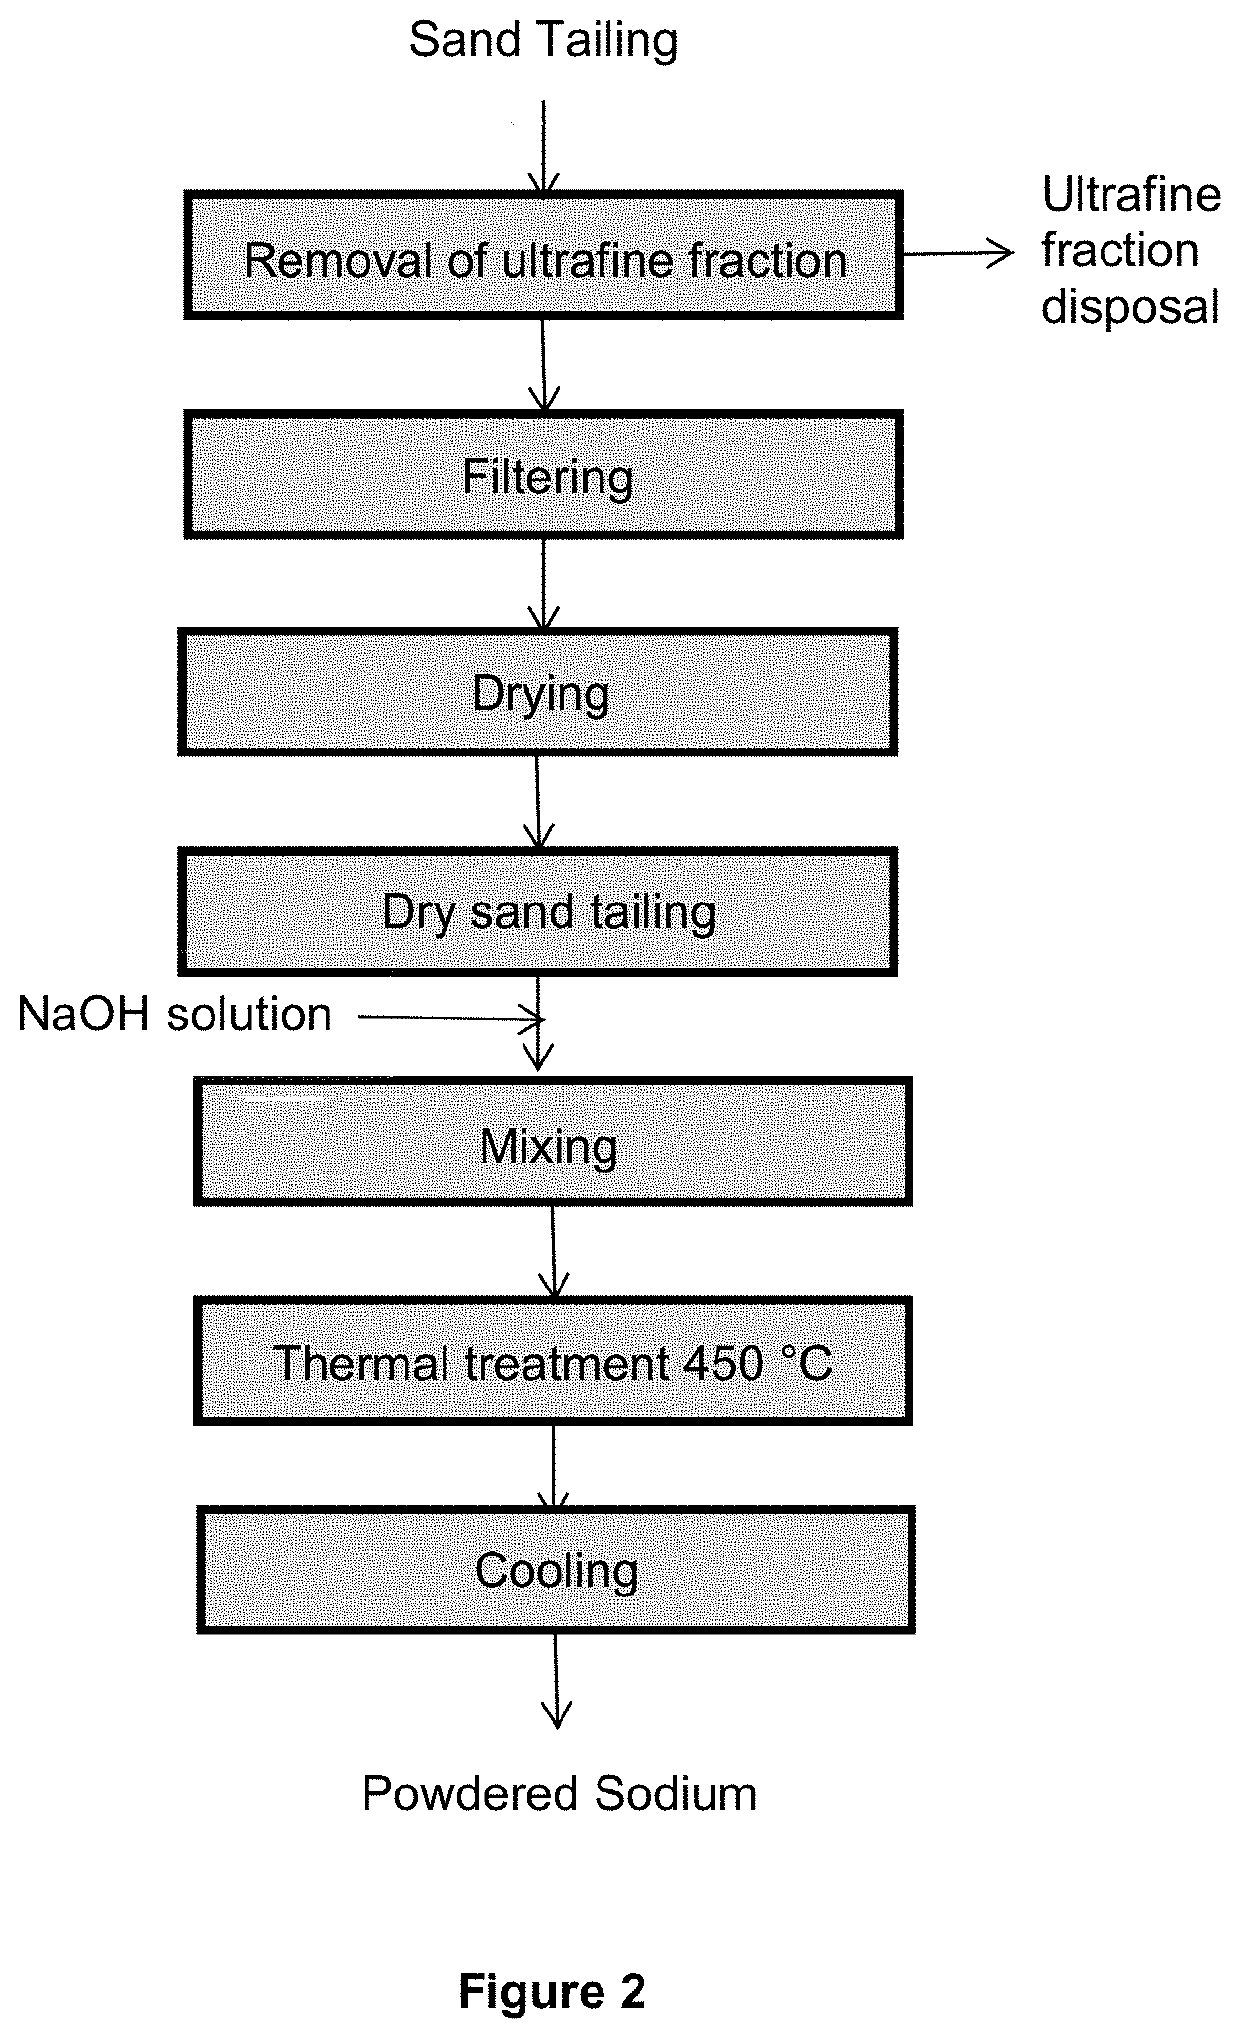 Process of obtaining powdered sodium silicate from sand tailings originated from the iron ore concentration process